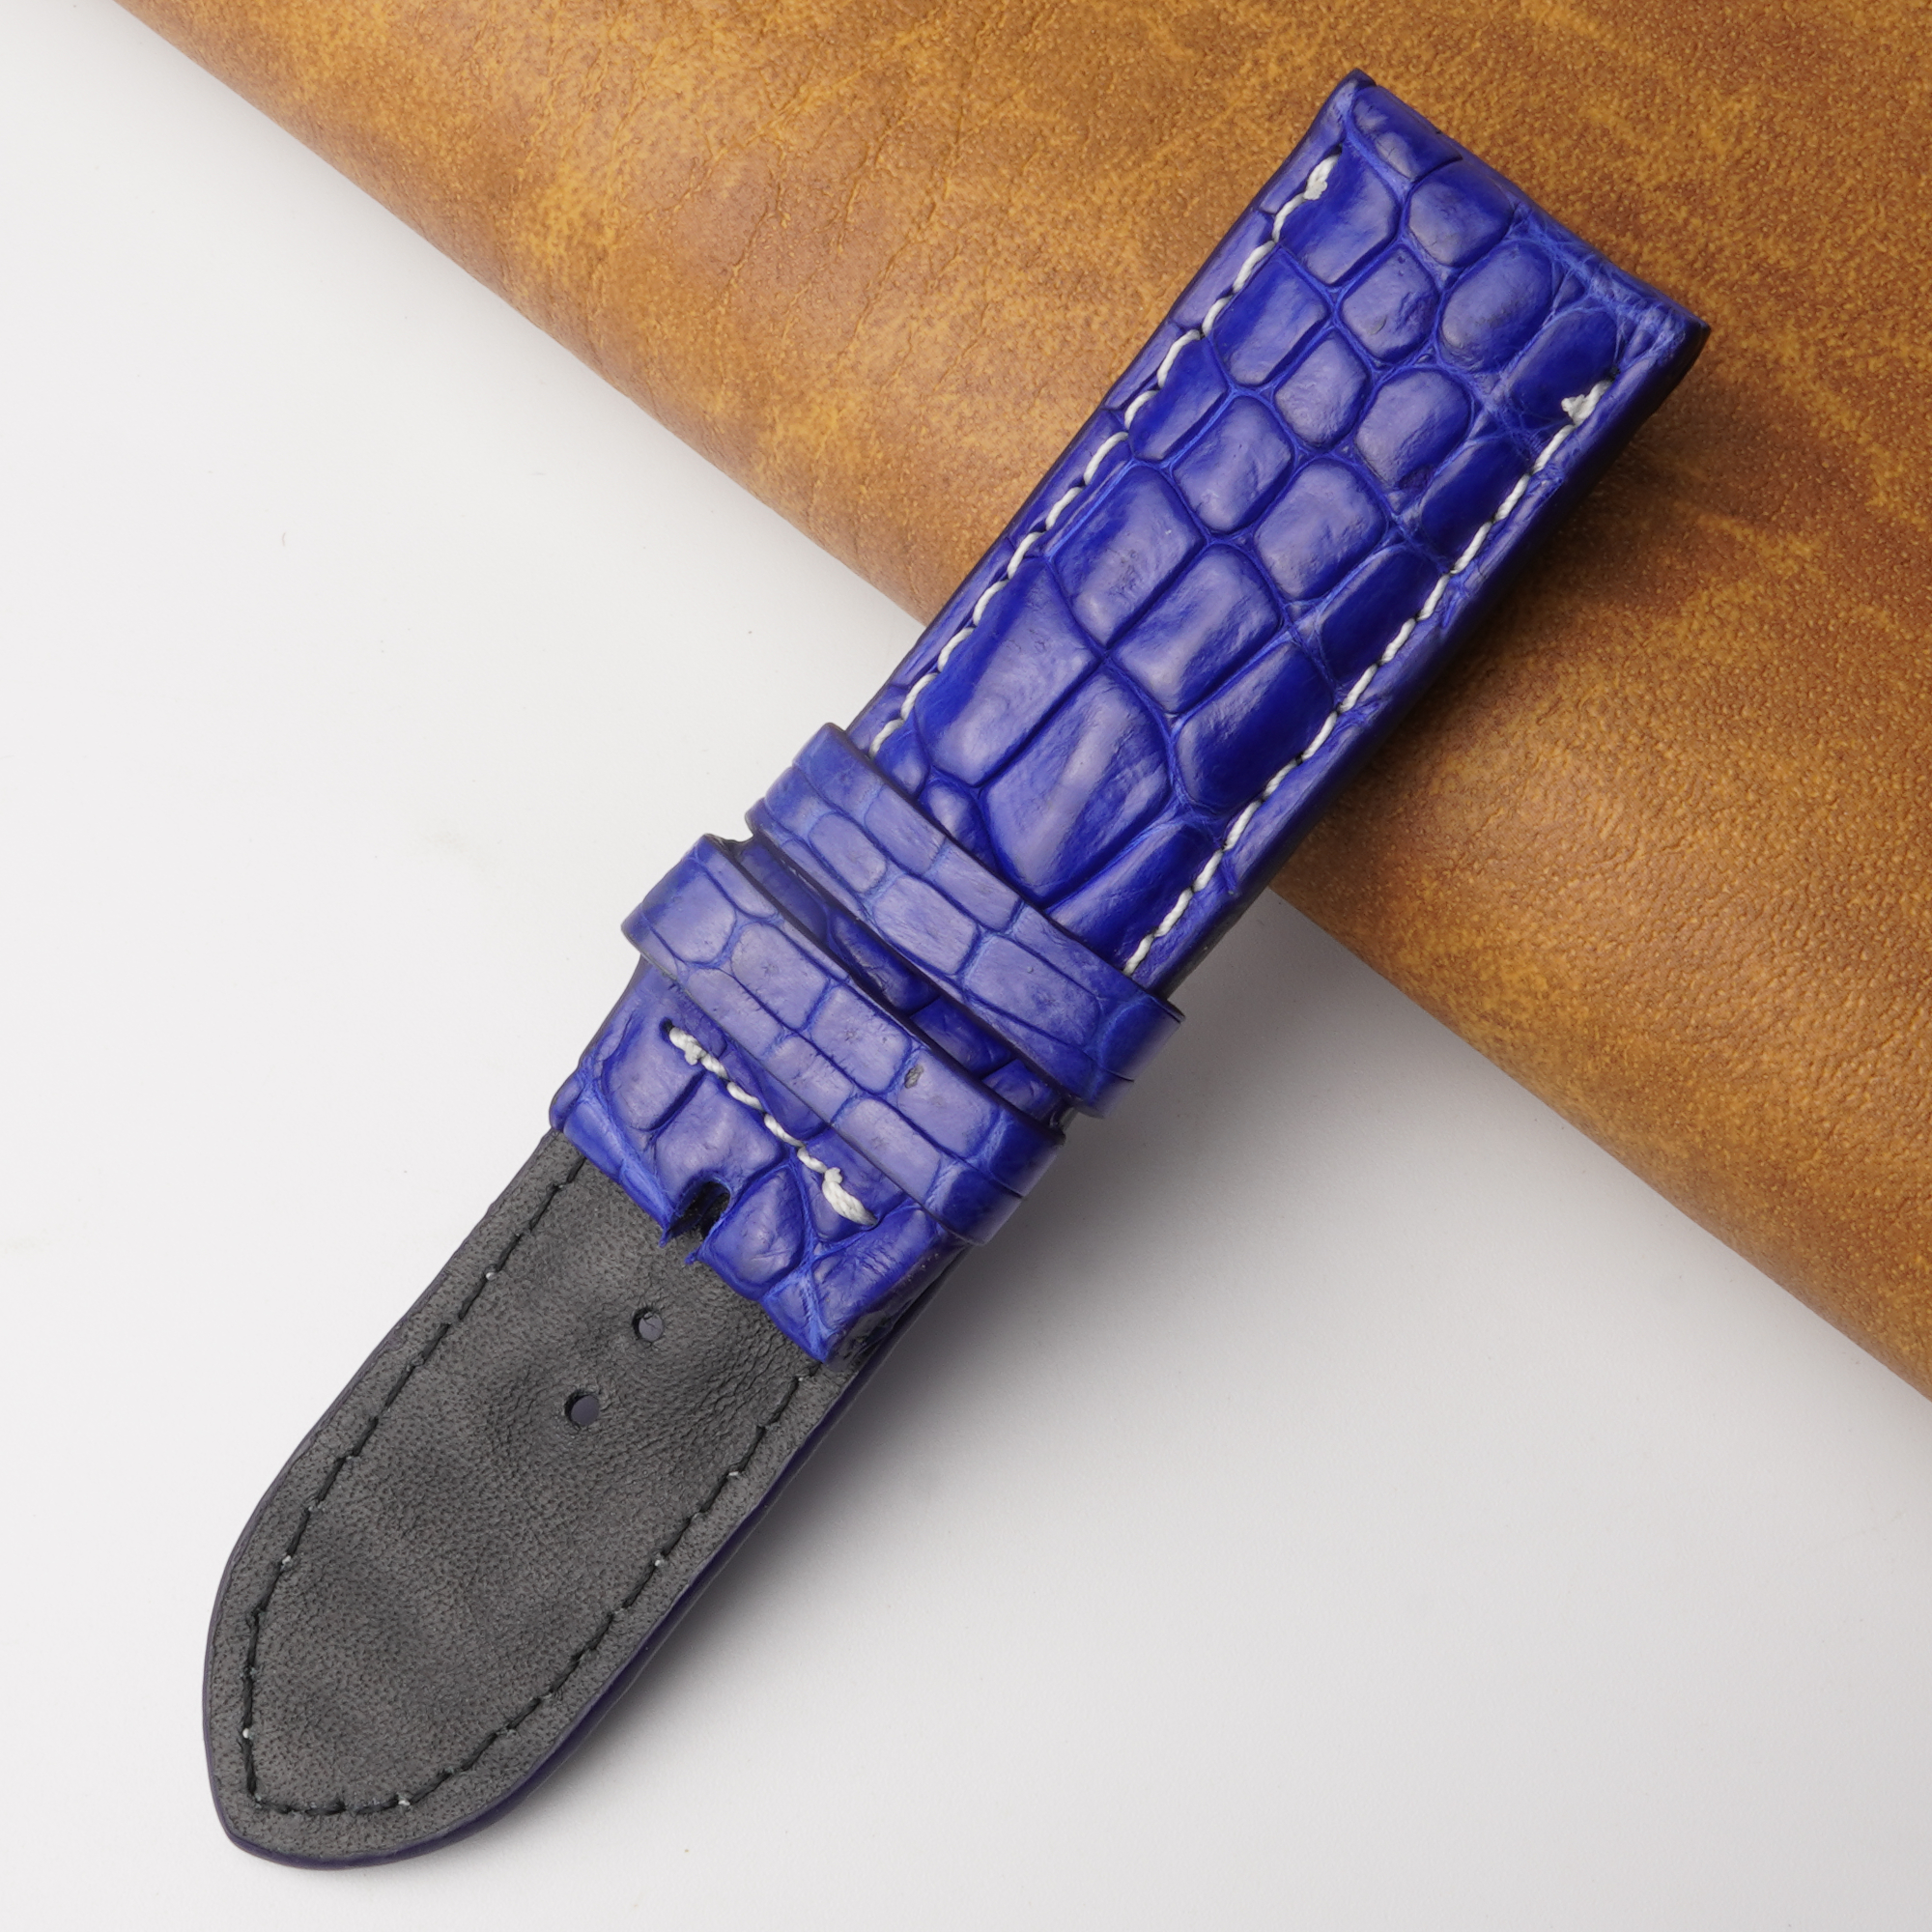 24mm Blue Unique Pattern Alligator Leather Watch Band For Men DH-159C